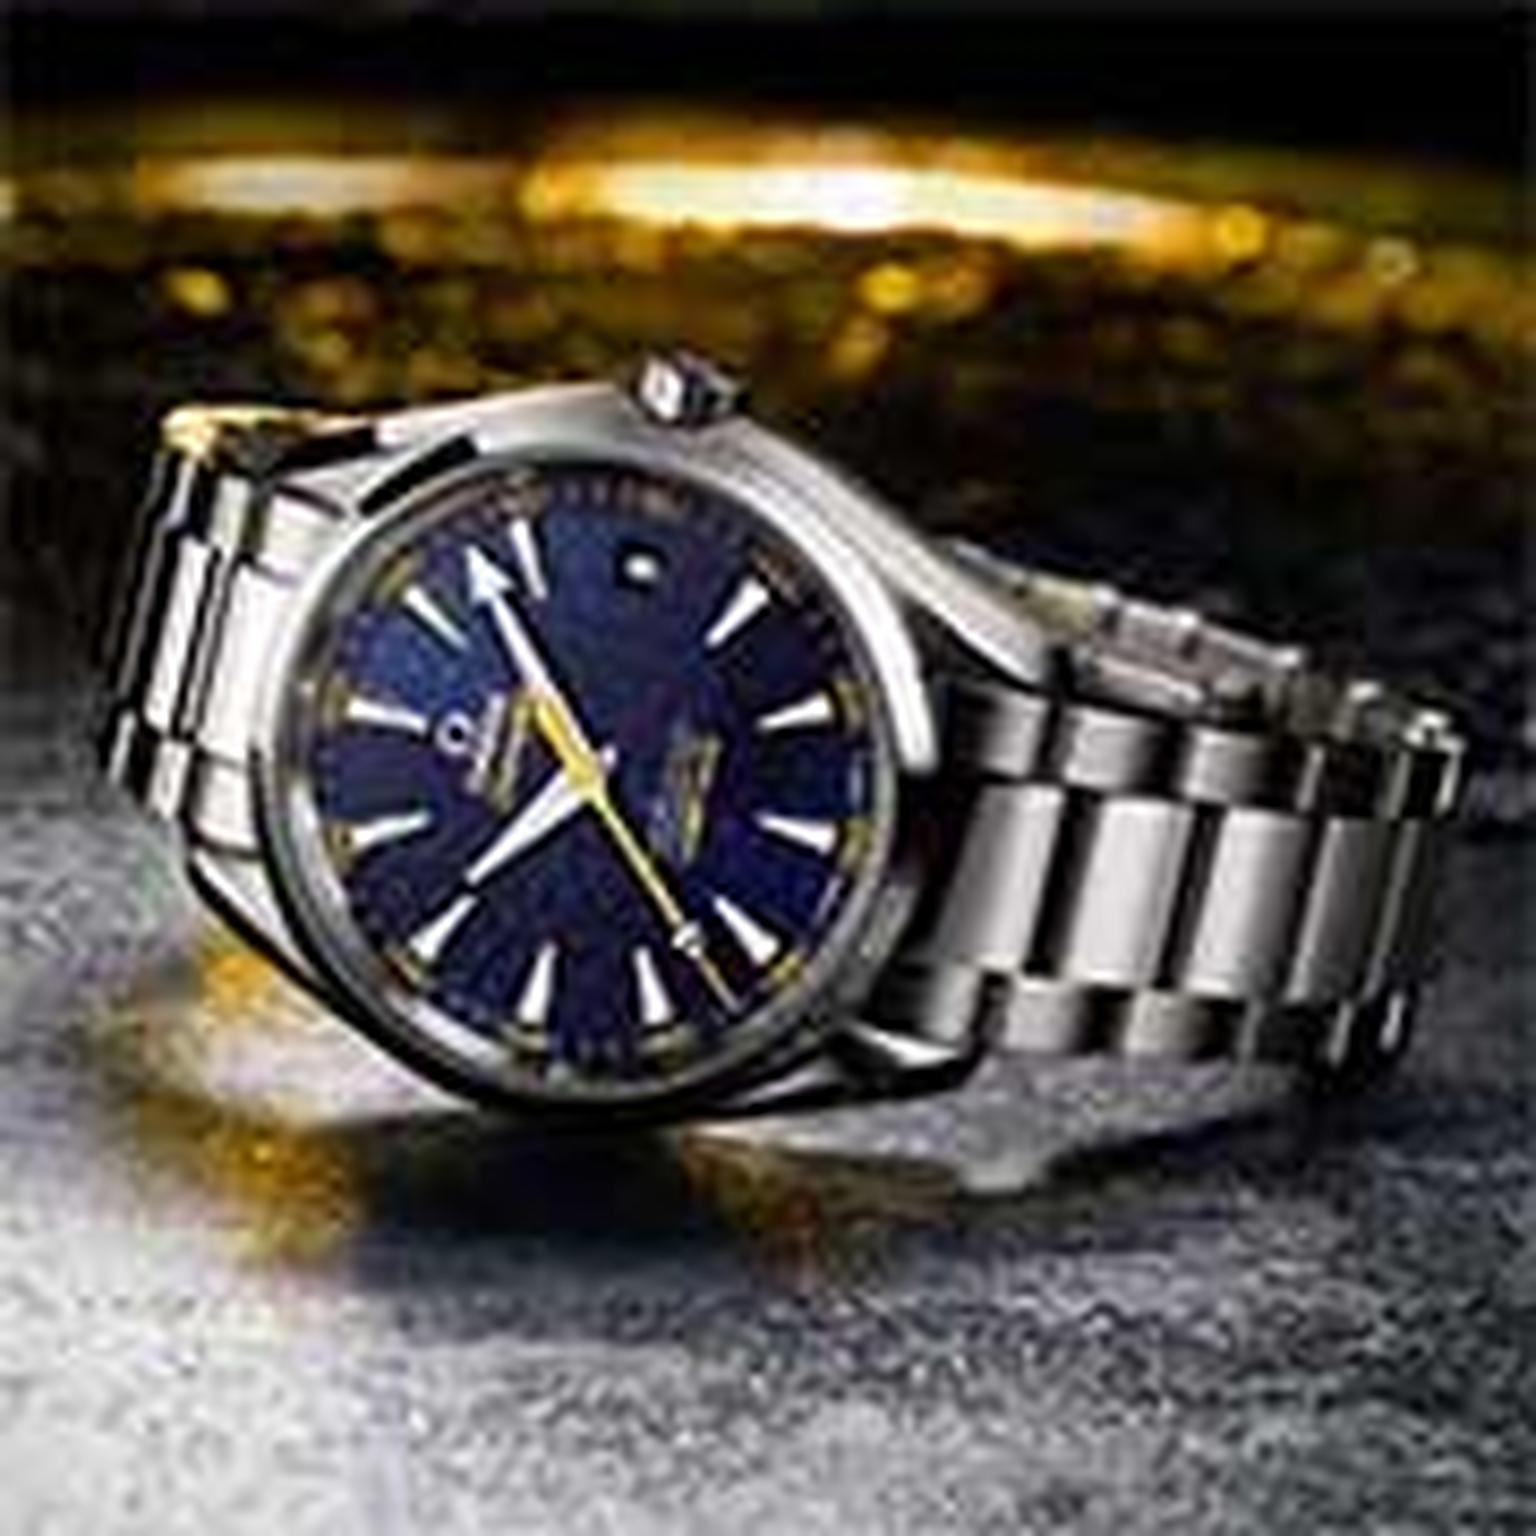 Ahead of the release of the new Spectre movie later this year, Omega watches has released the new Seamaster Aqua Terra 150M. Inspired by the Bond family coat of arms, which can be seen on the tip of the yellow central seconds hand, the blue textured dial 